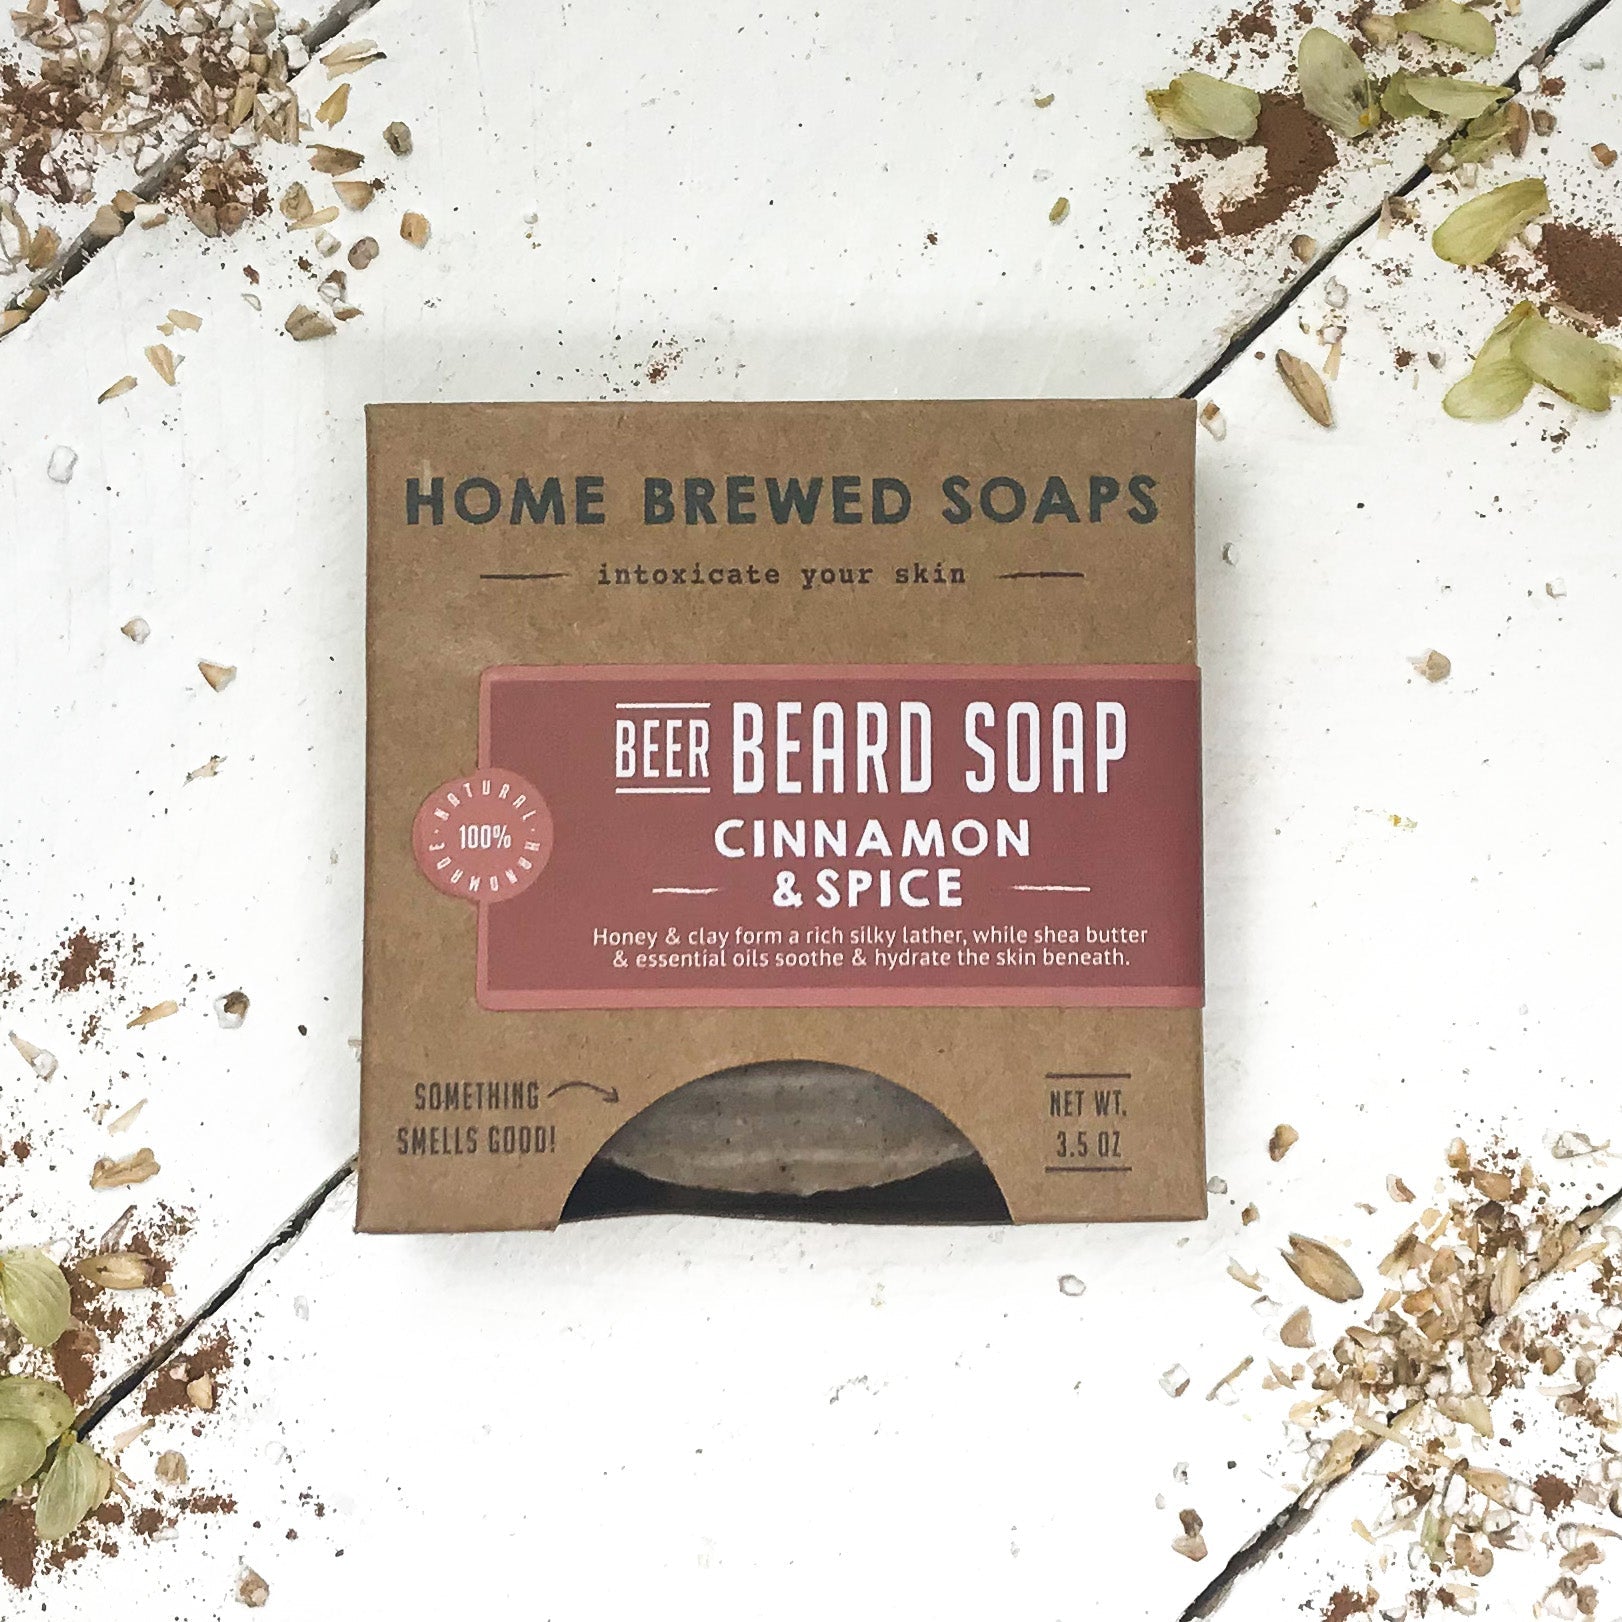 Christmas Gift Box for Men - Beard Care Kit - Cinnamon Spice by Home Brewed Soaps